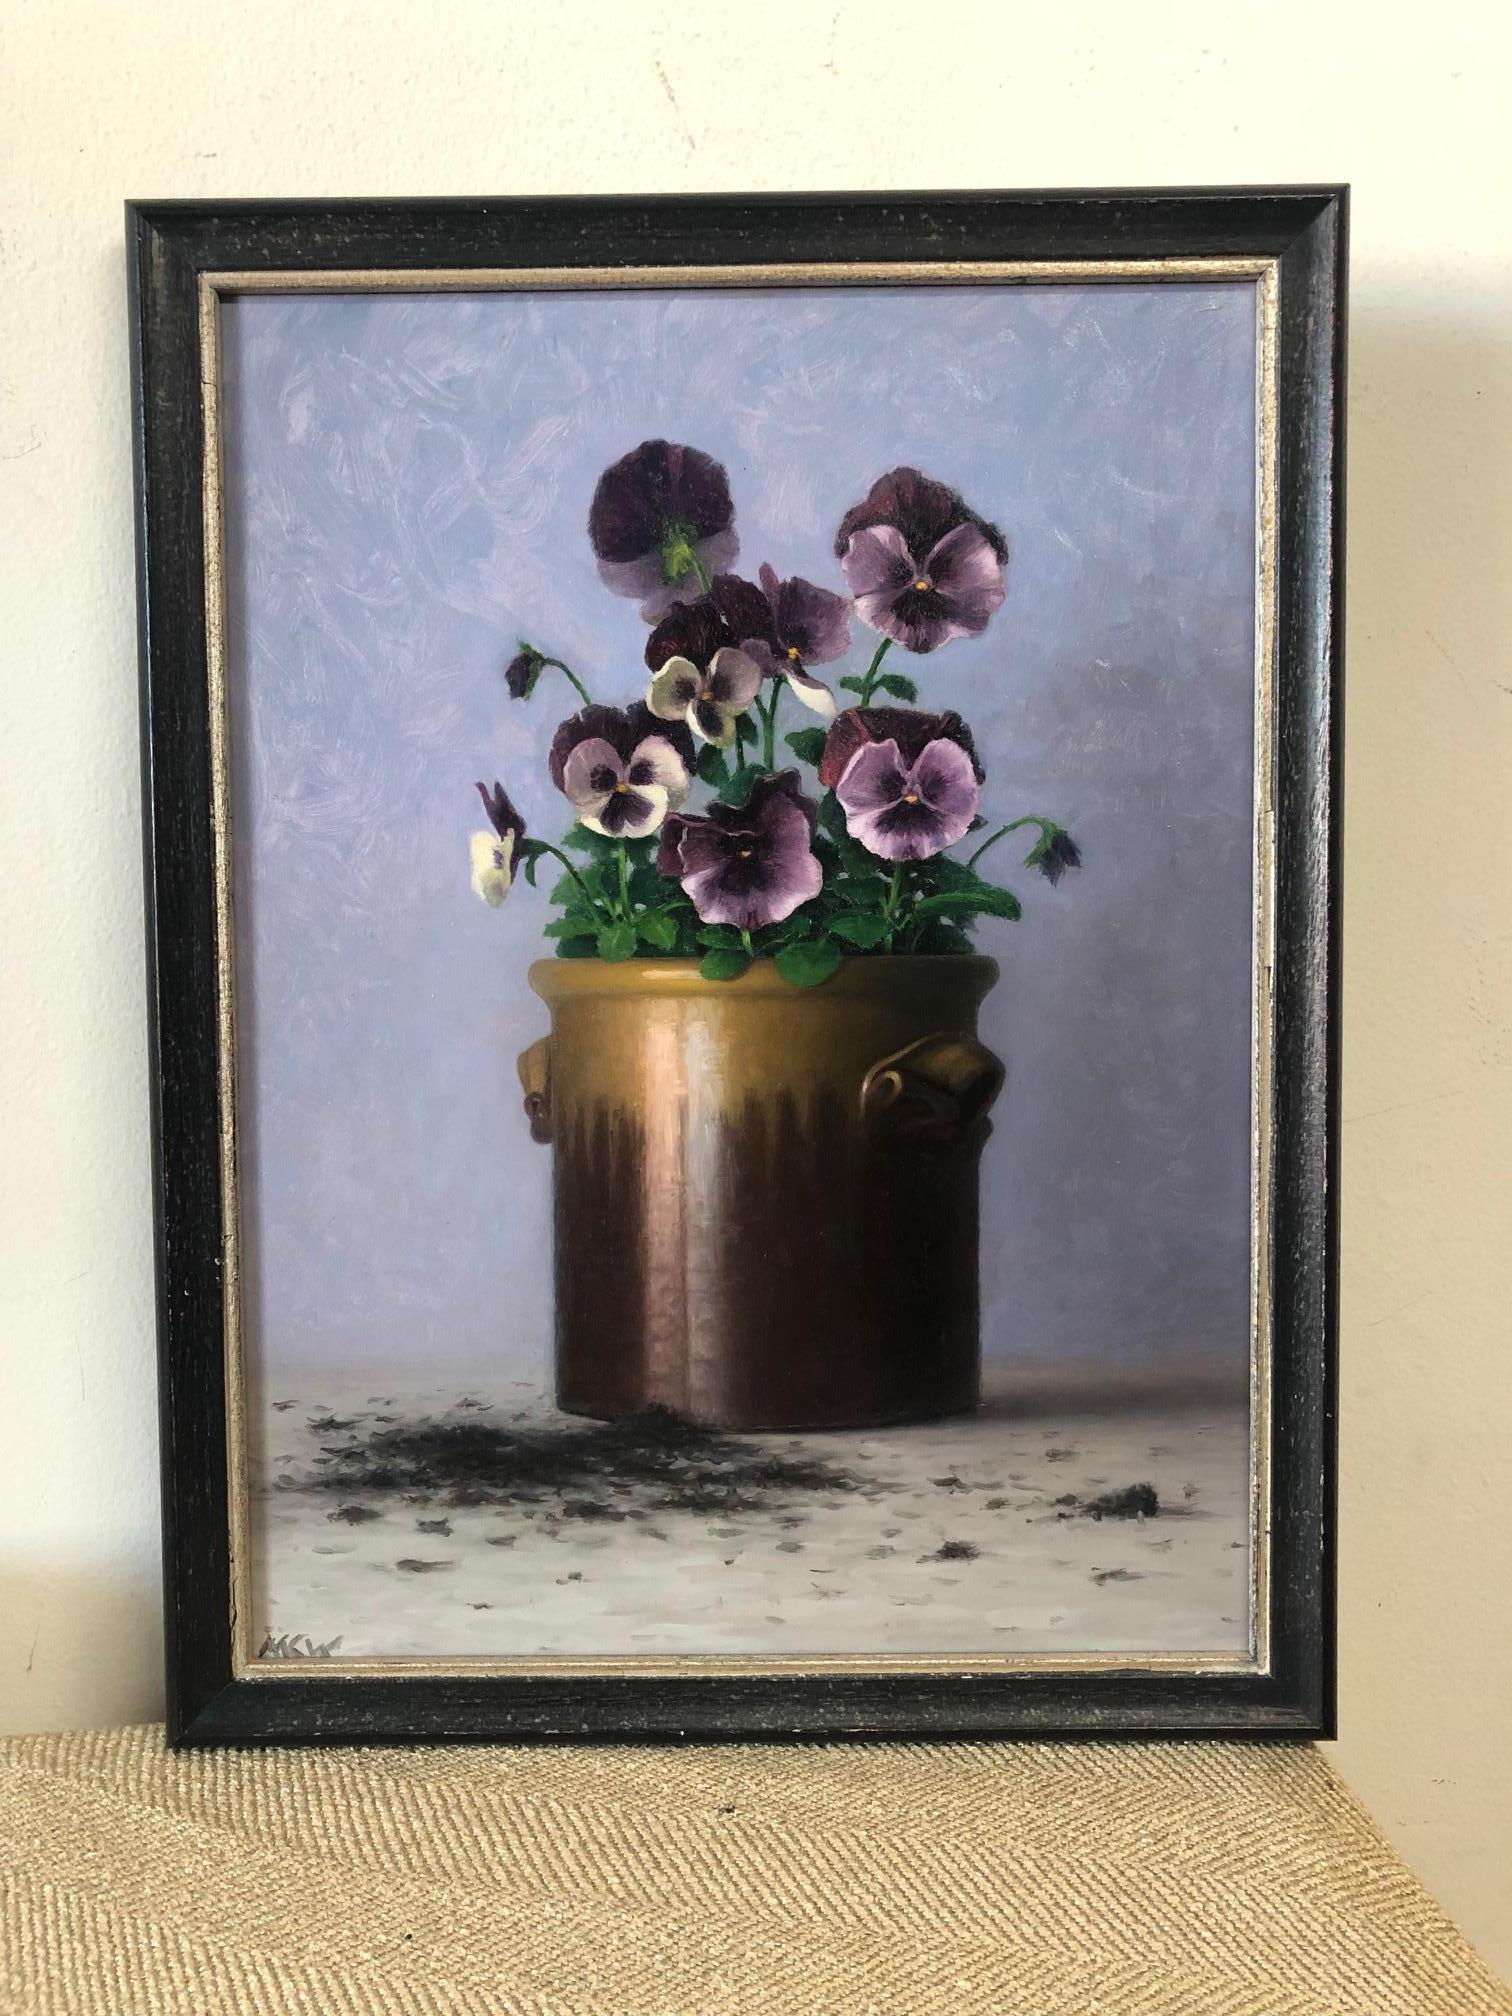 Pansies and Spilled Dirt - Oil painting, by Contemporary American Realist - Painting by Matthew Weigle